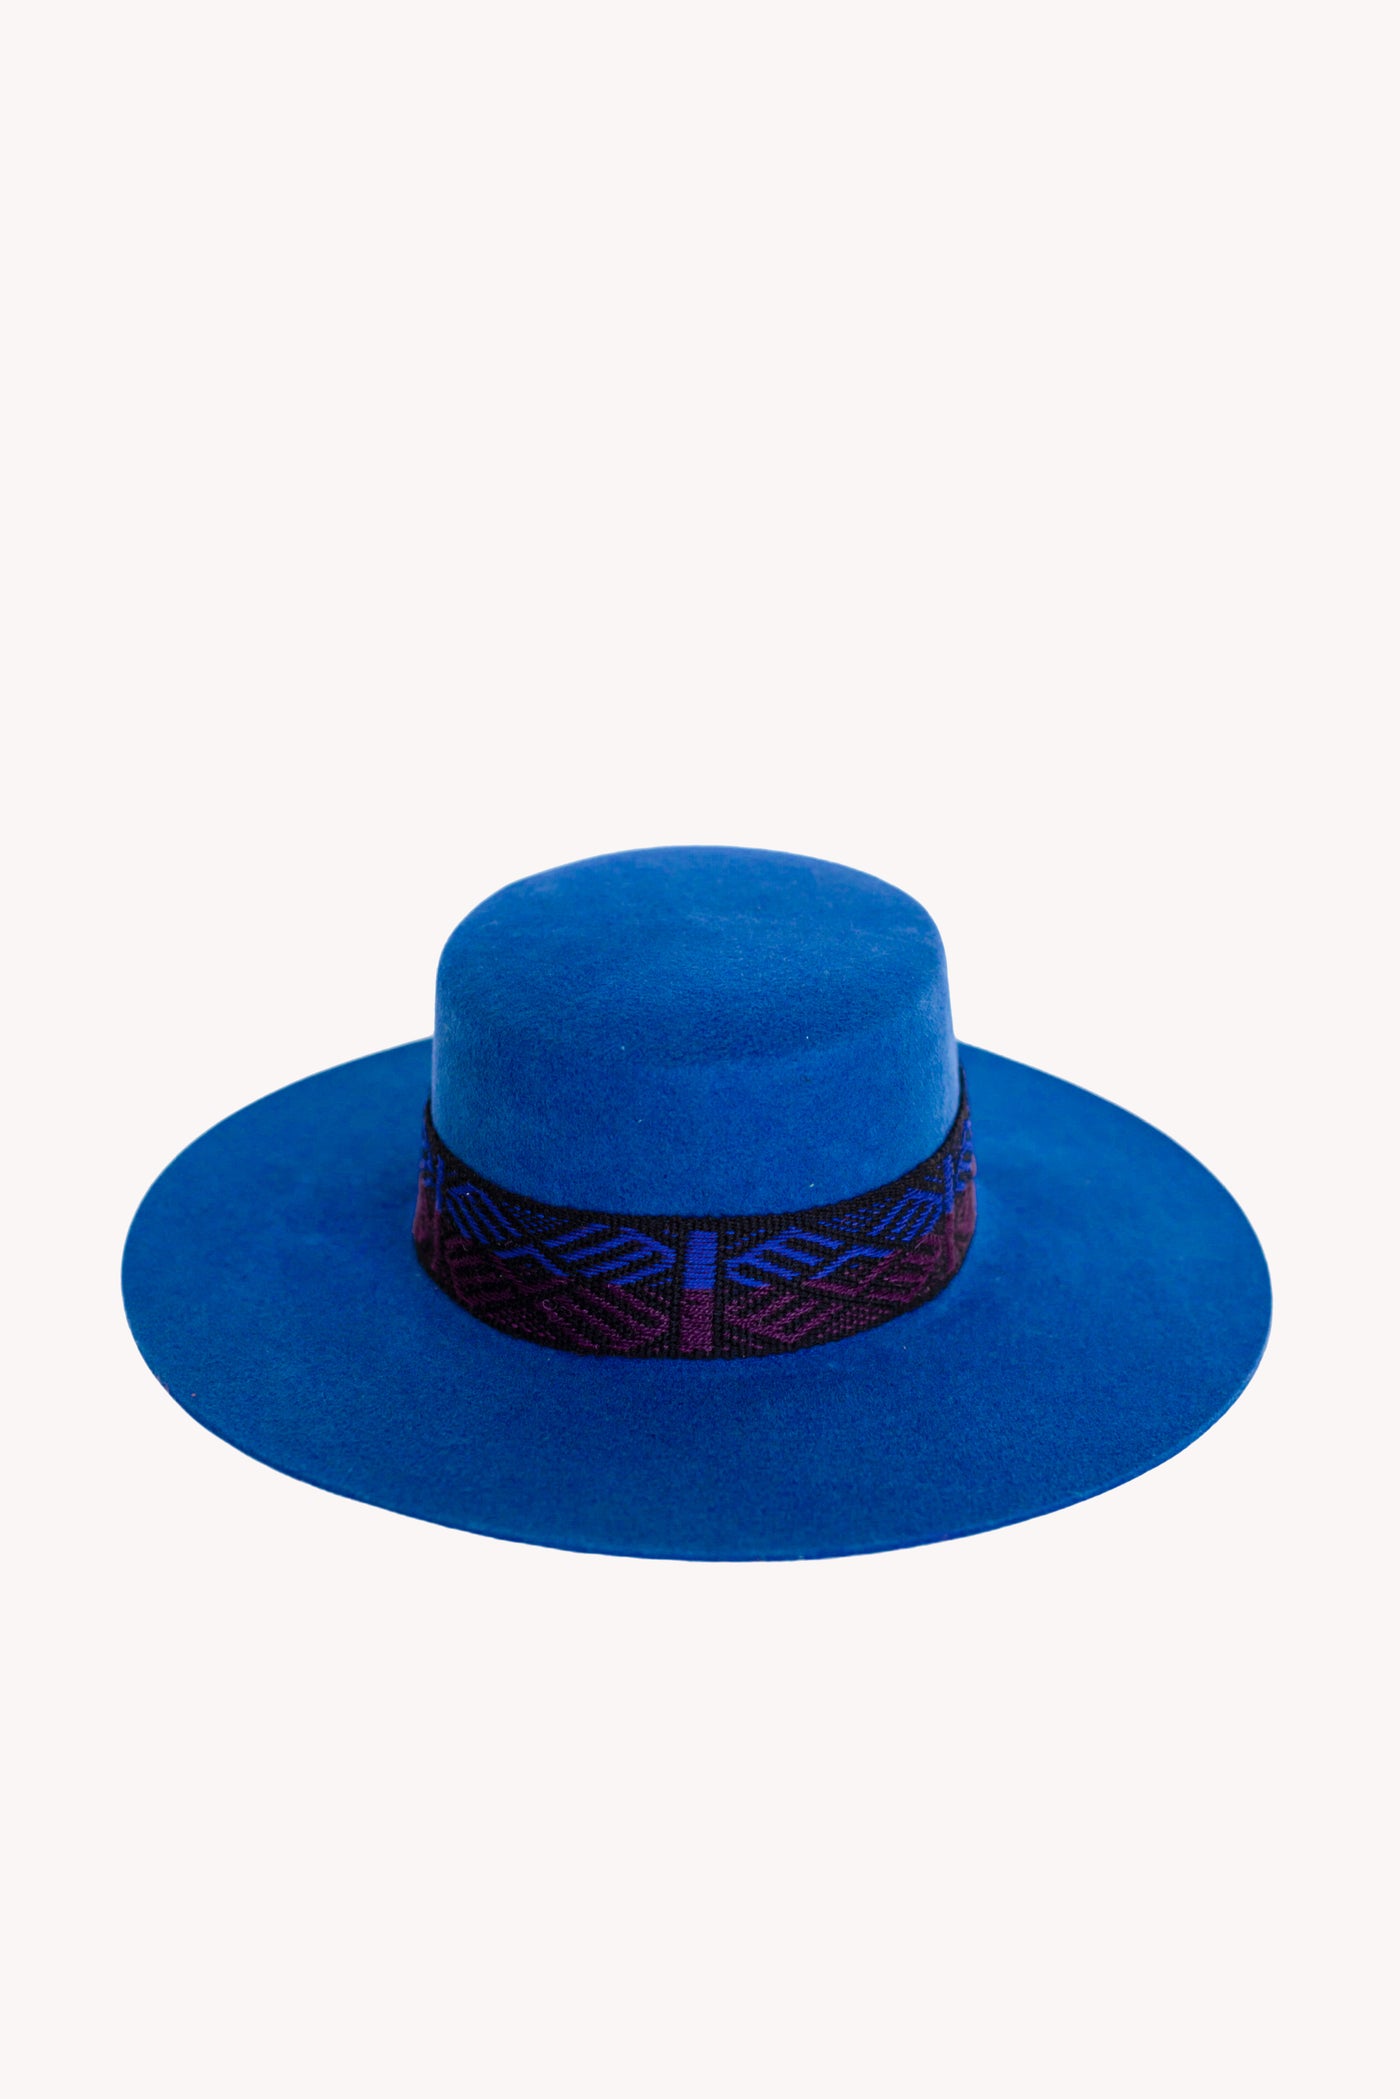 Electric Blue Spanish Hat with Wisdom Intention Band Removable Intention Hat Textile Band